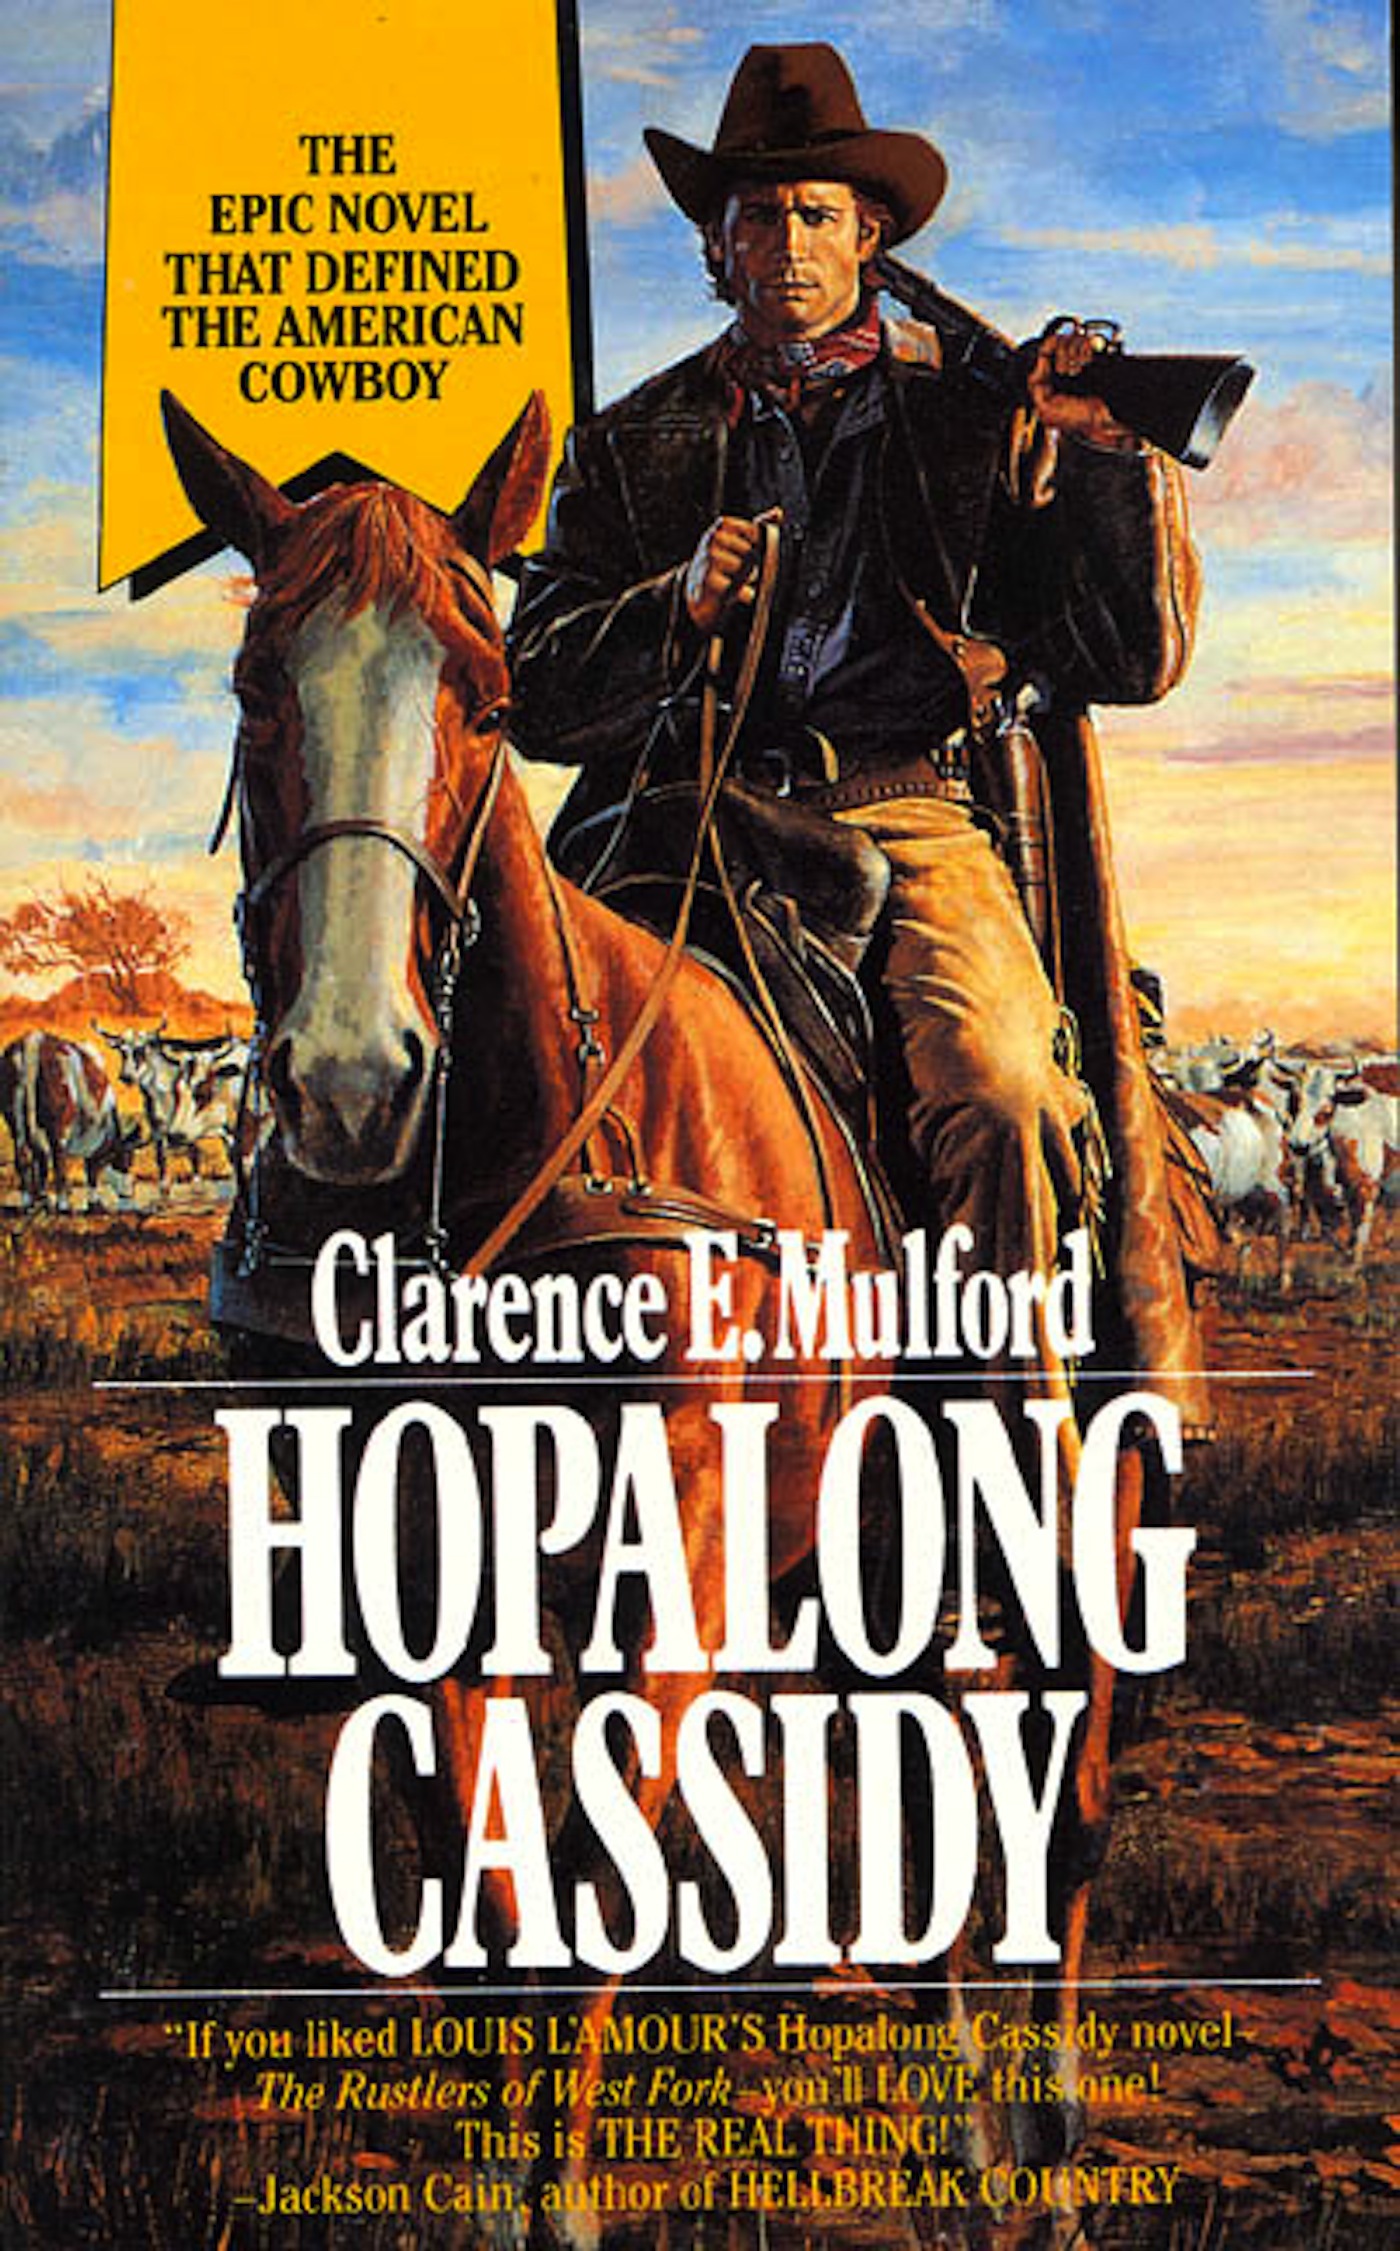 Hopalong Cassidy by Clarence E. Mulford